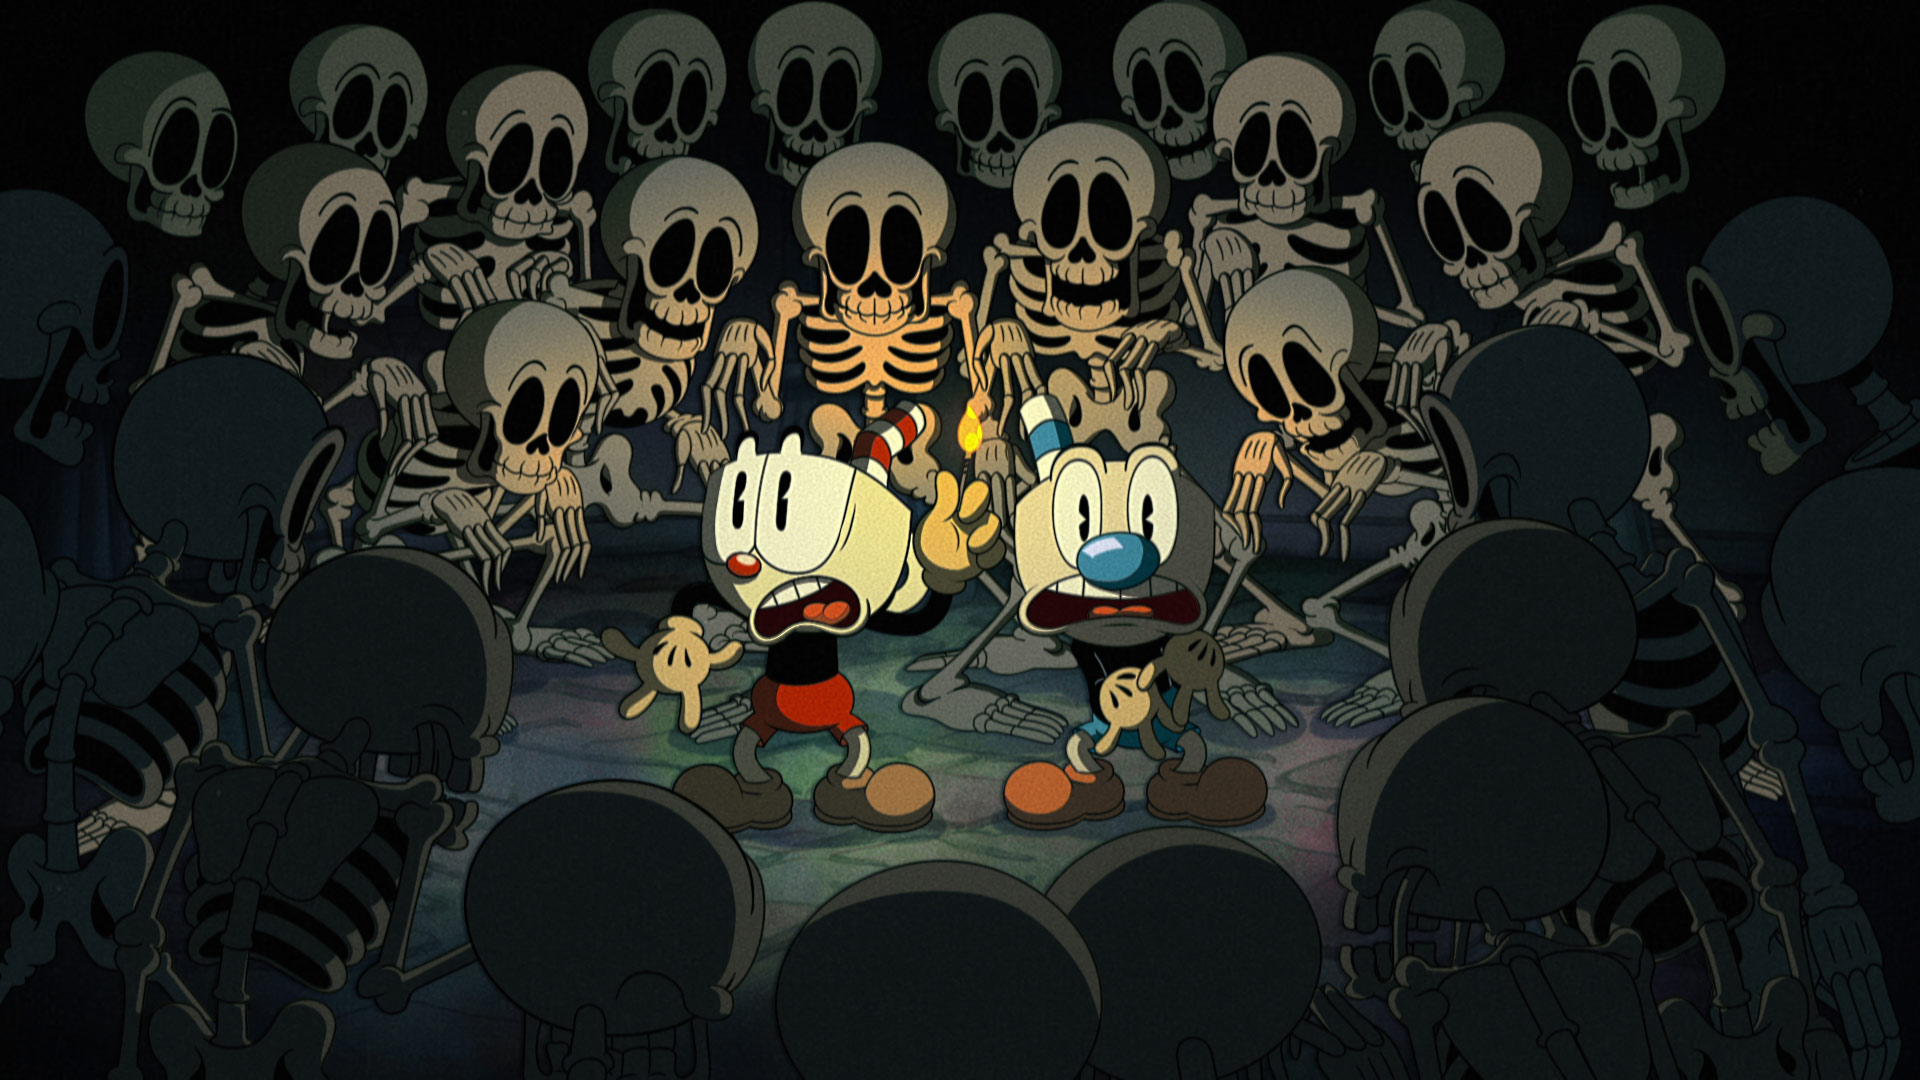 The Cuphead Show!' Trailer, Poster & Debut Date Revealed – Deadline